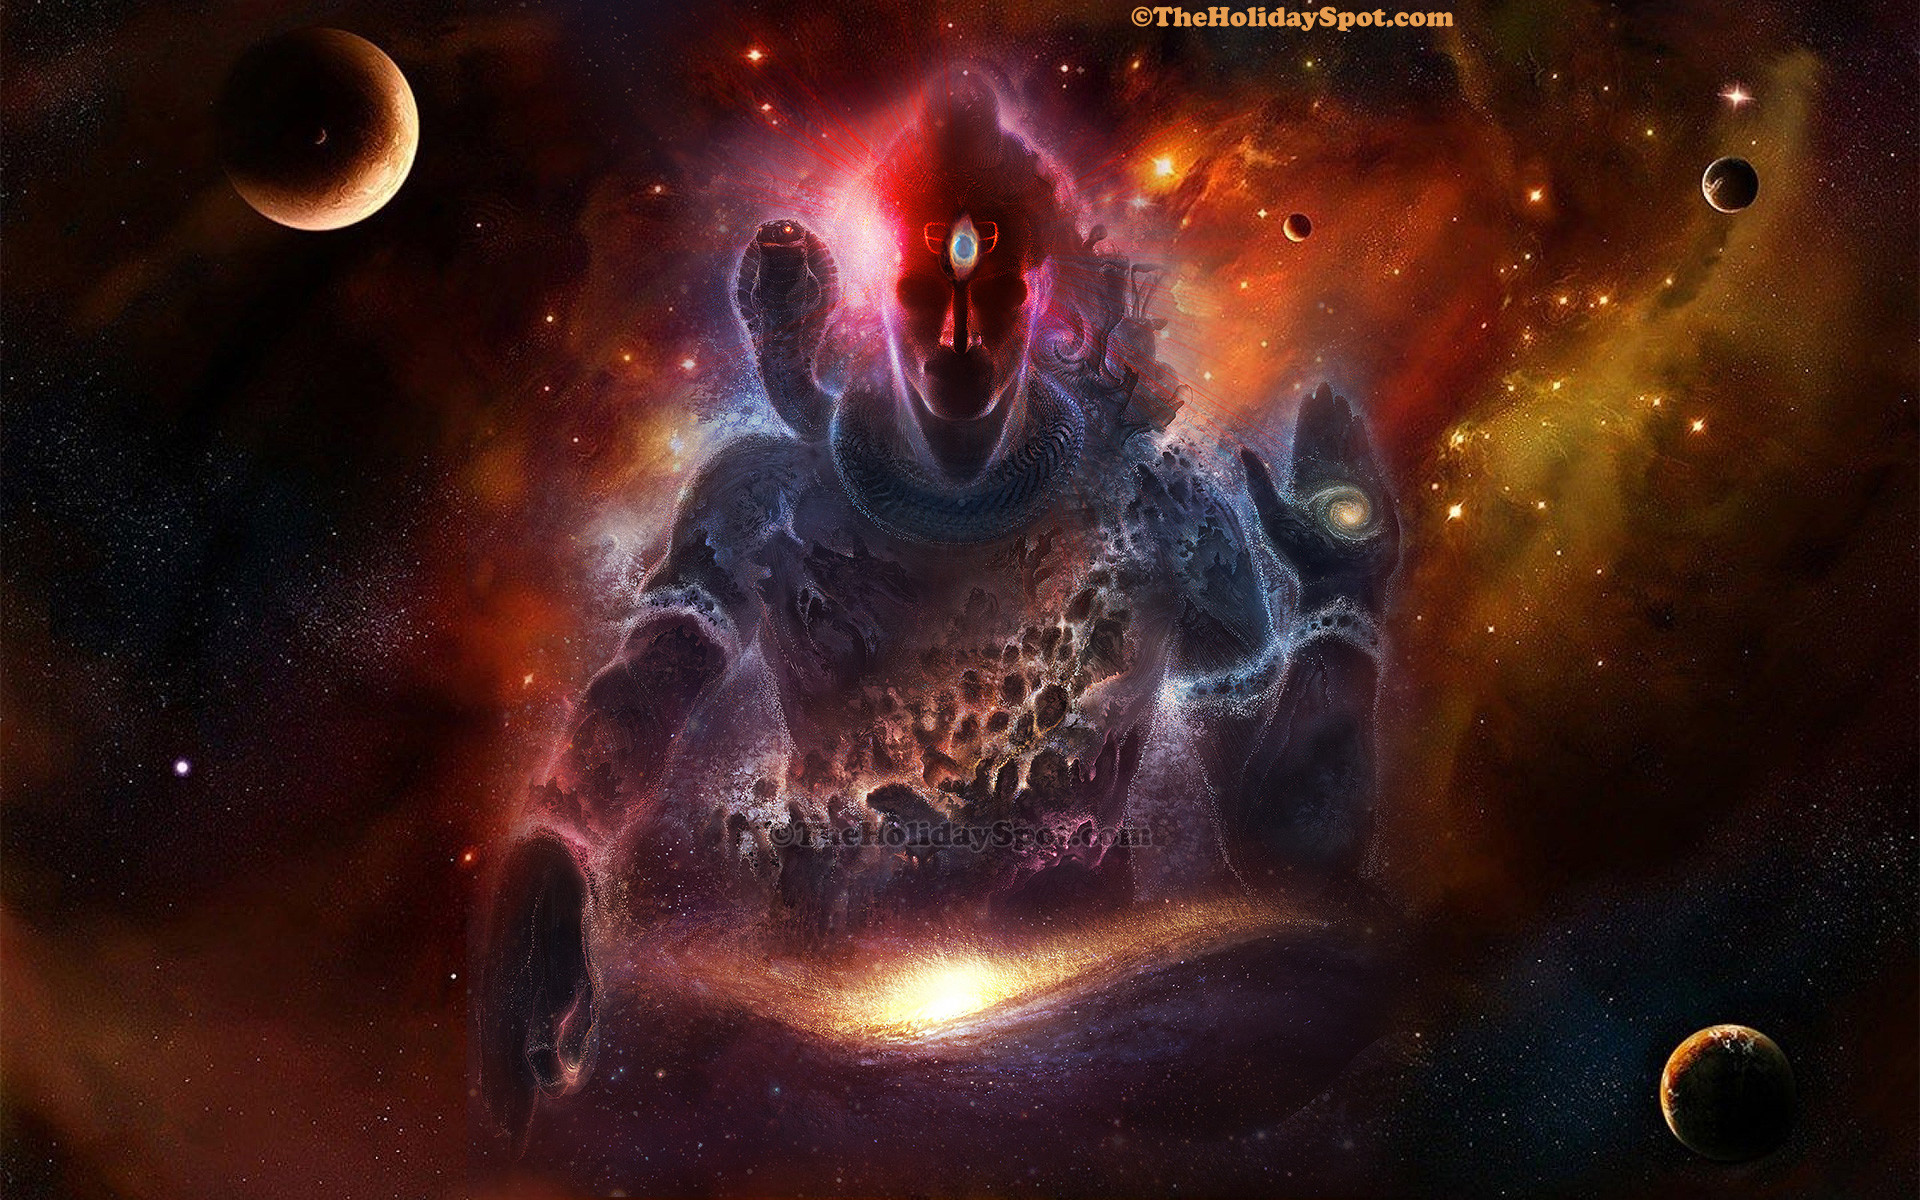 High definition wallpaper of Shiva The Lord of Destruction